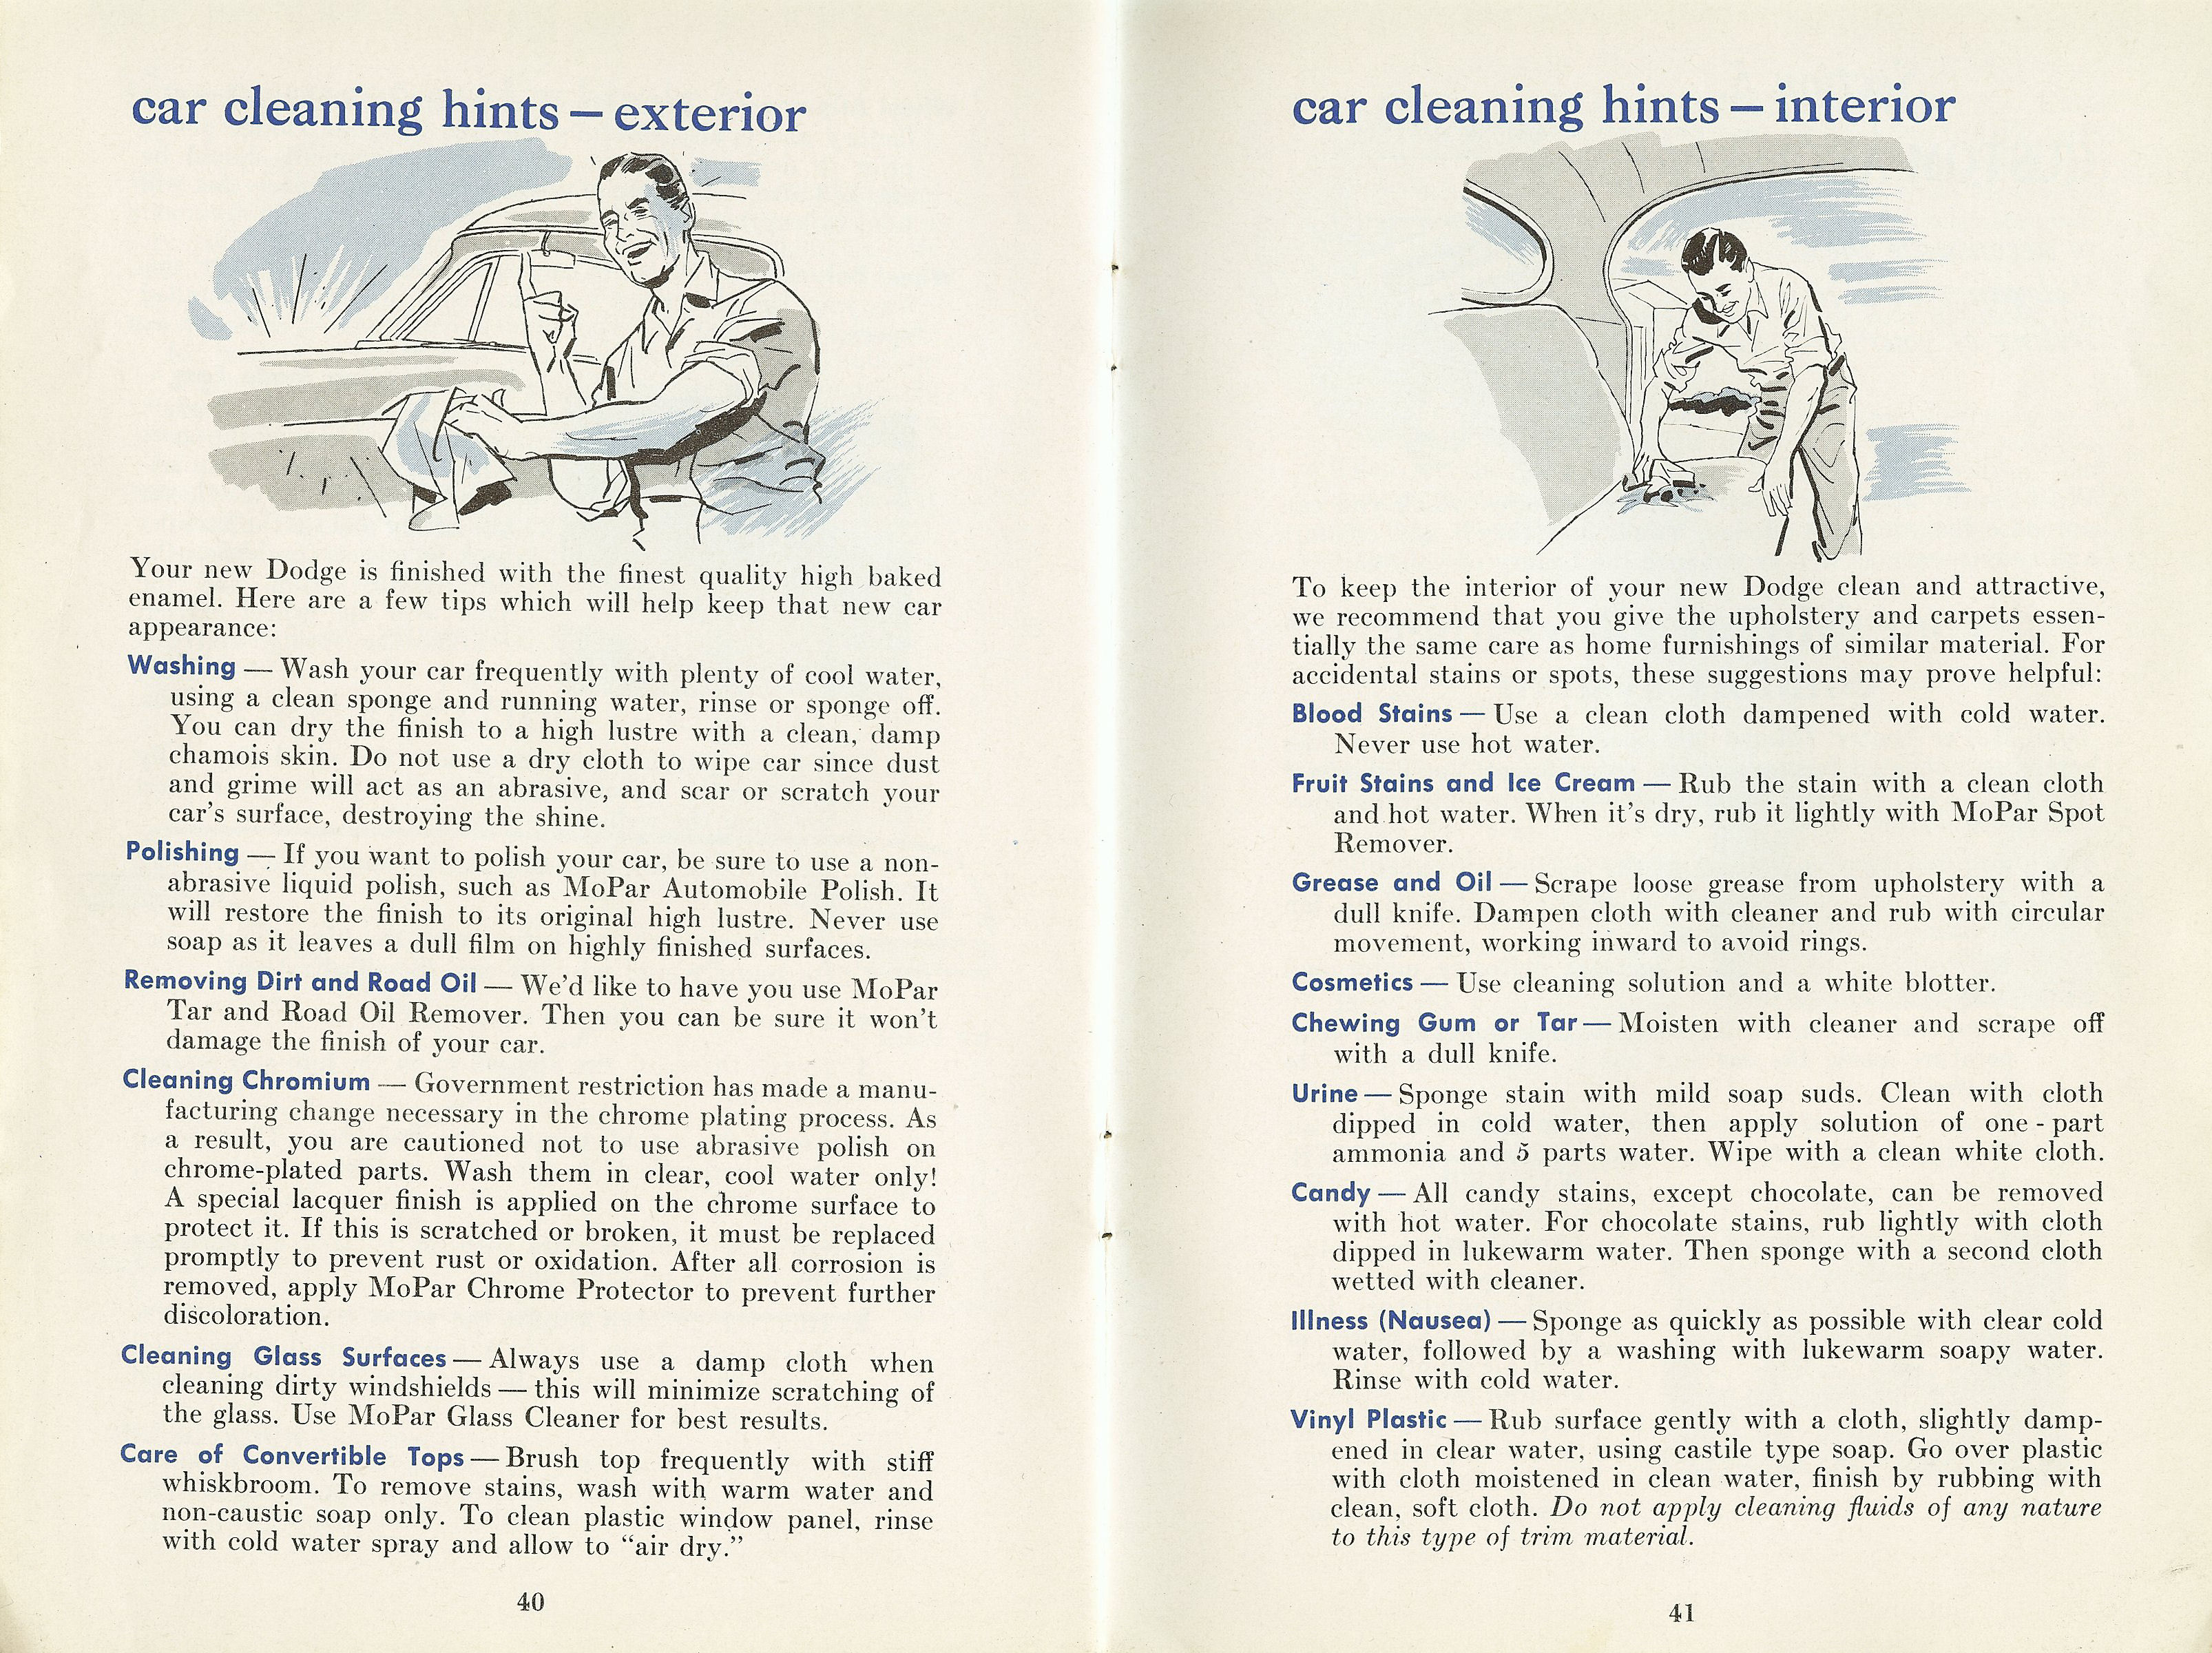 1954 Dodge Owners Manual-40-41